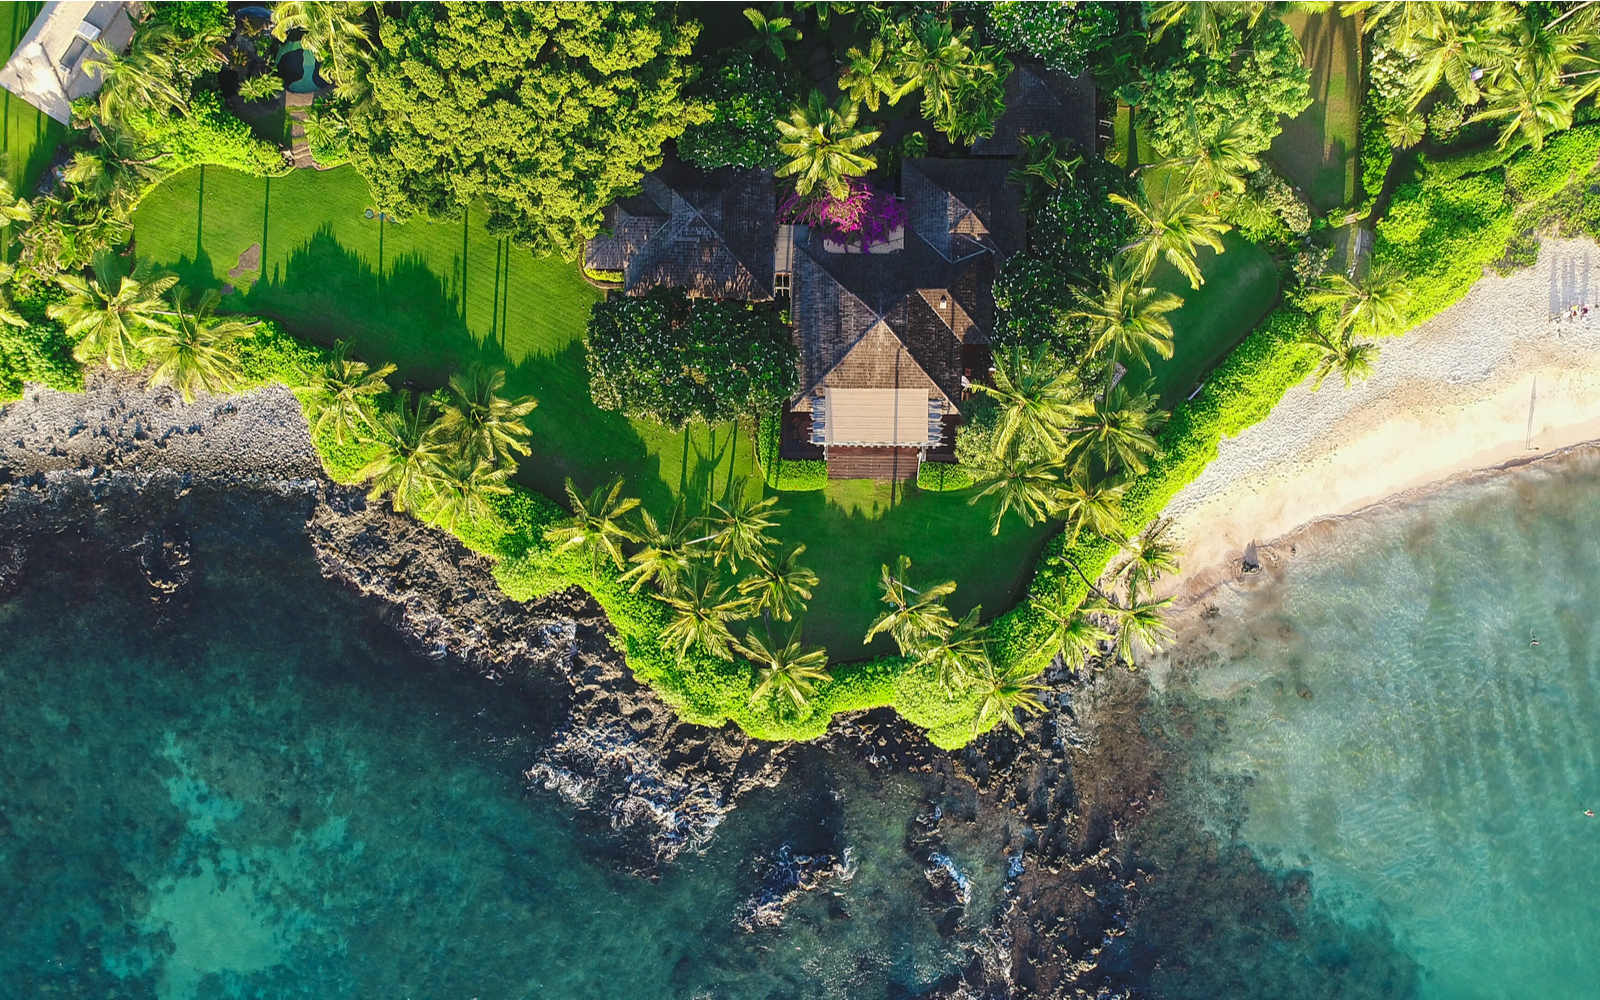 The 15 Best Airbnbs in Hawaii in 2022